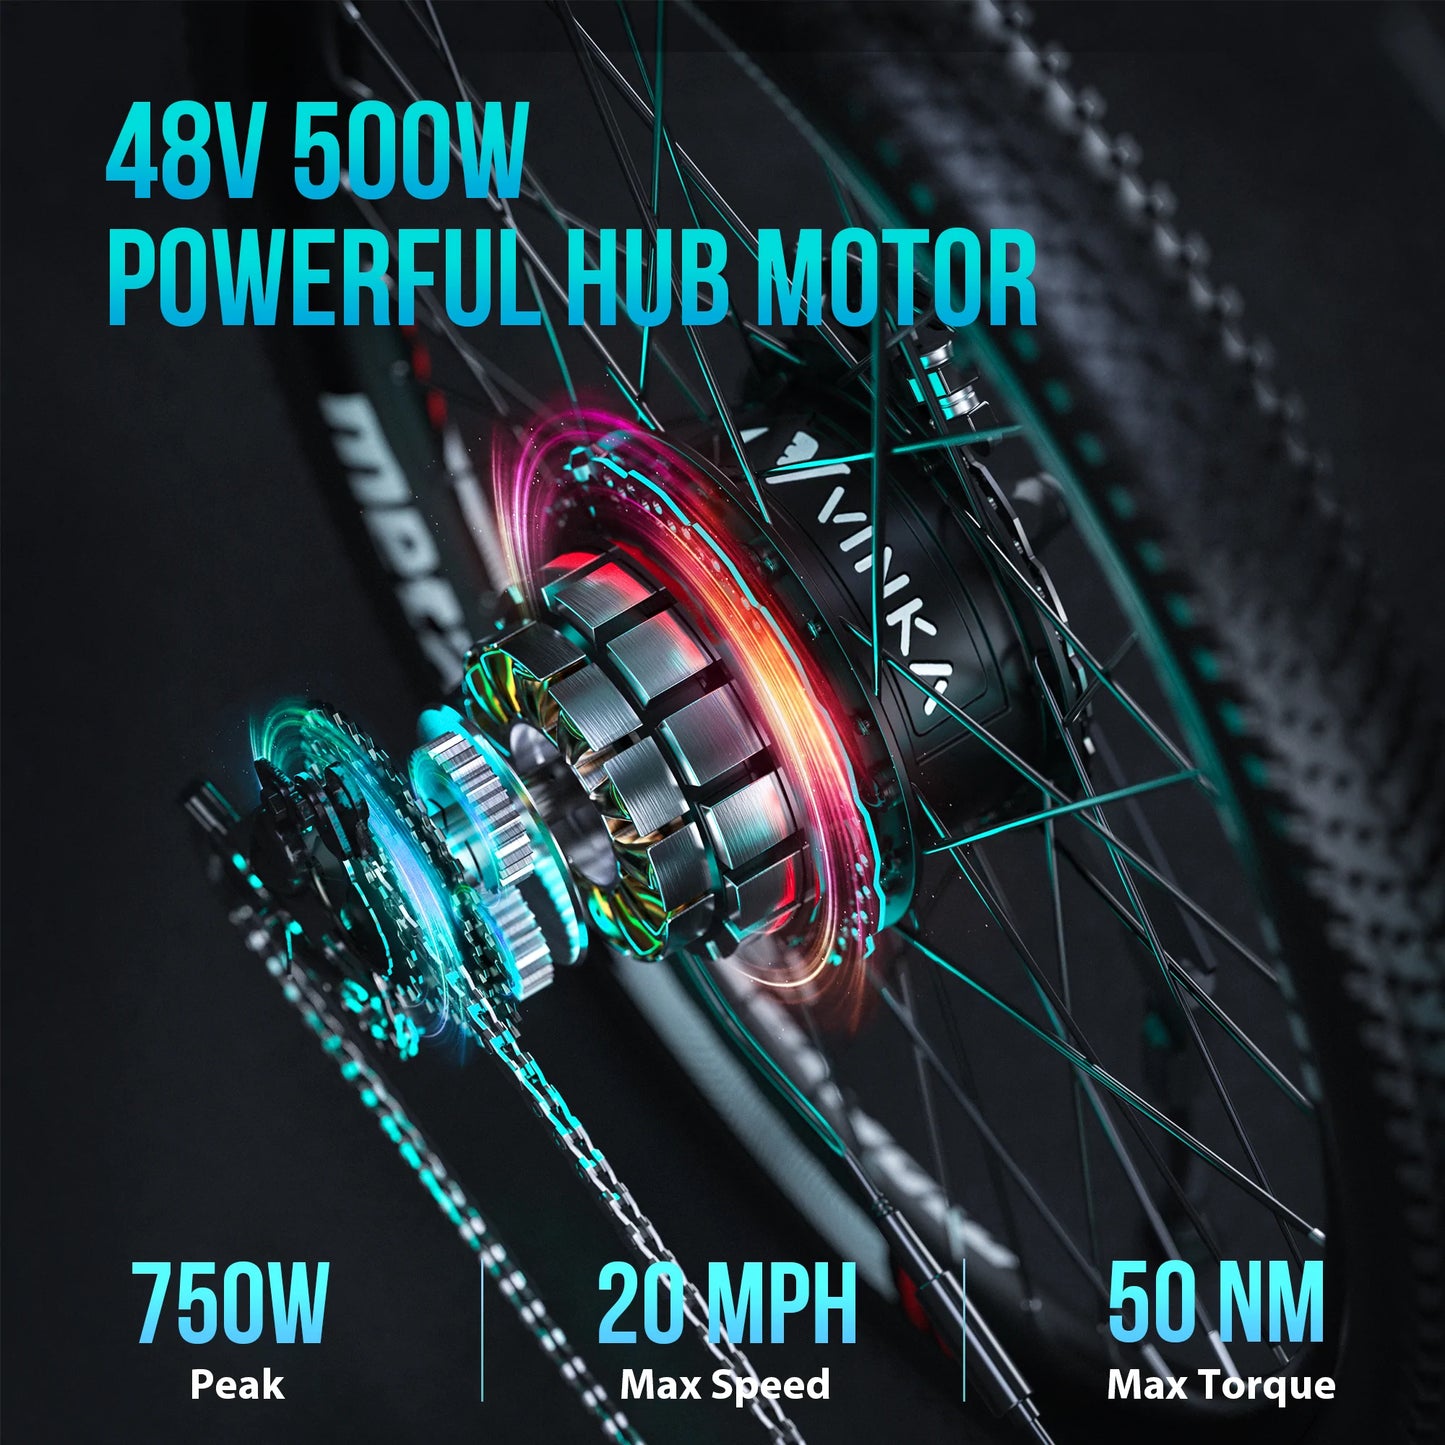 CA Warehouse Stock Cybertrack 300 27.5*2.1" Tire Electric Bike with 500W Motor 48V 10.4Ah Battery